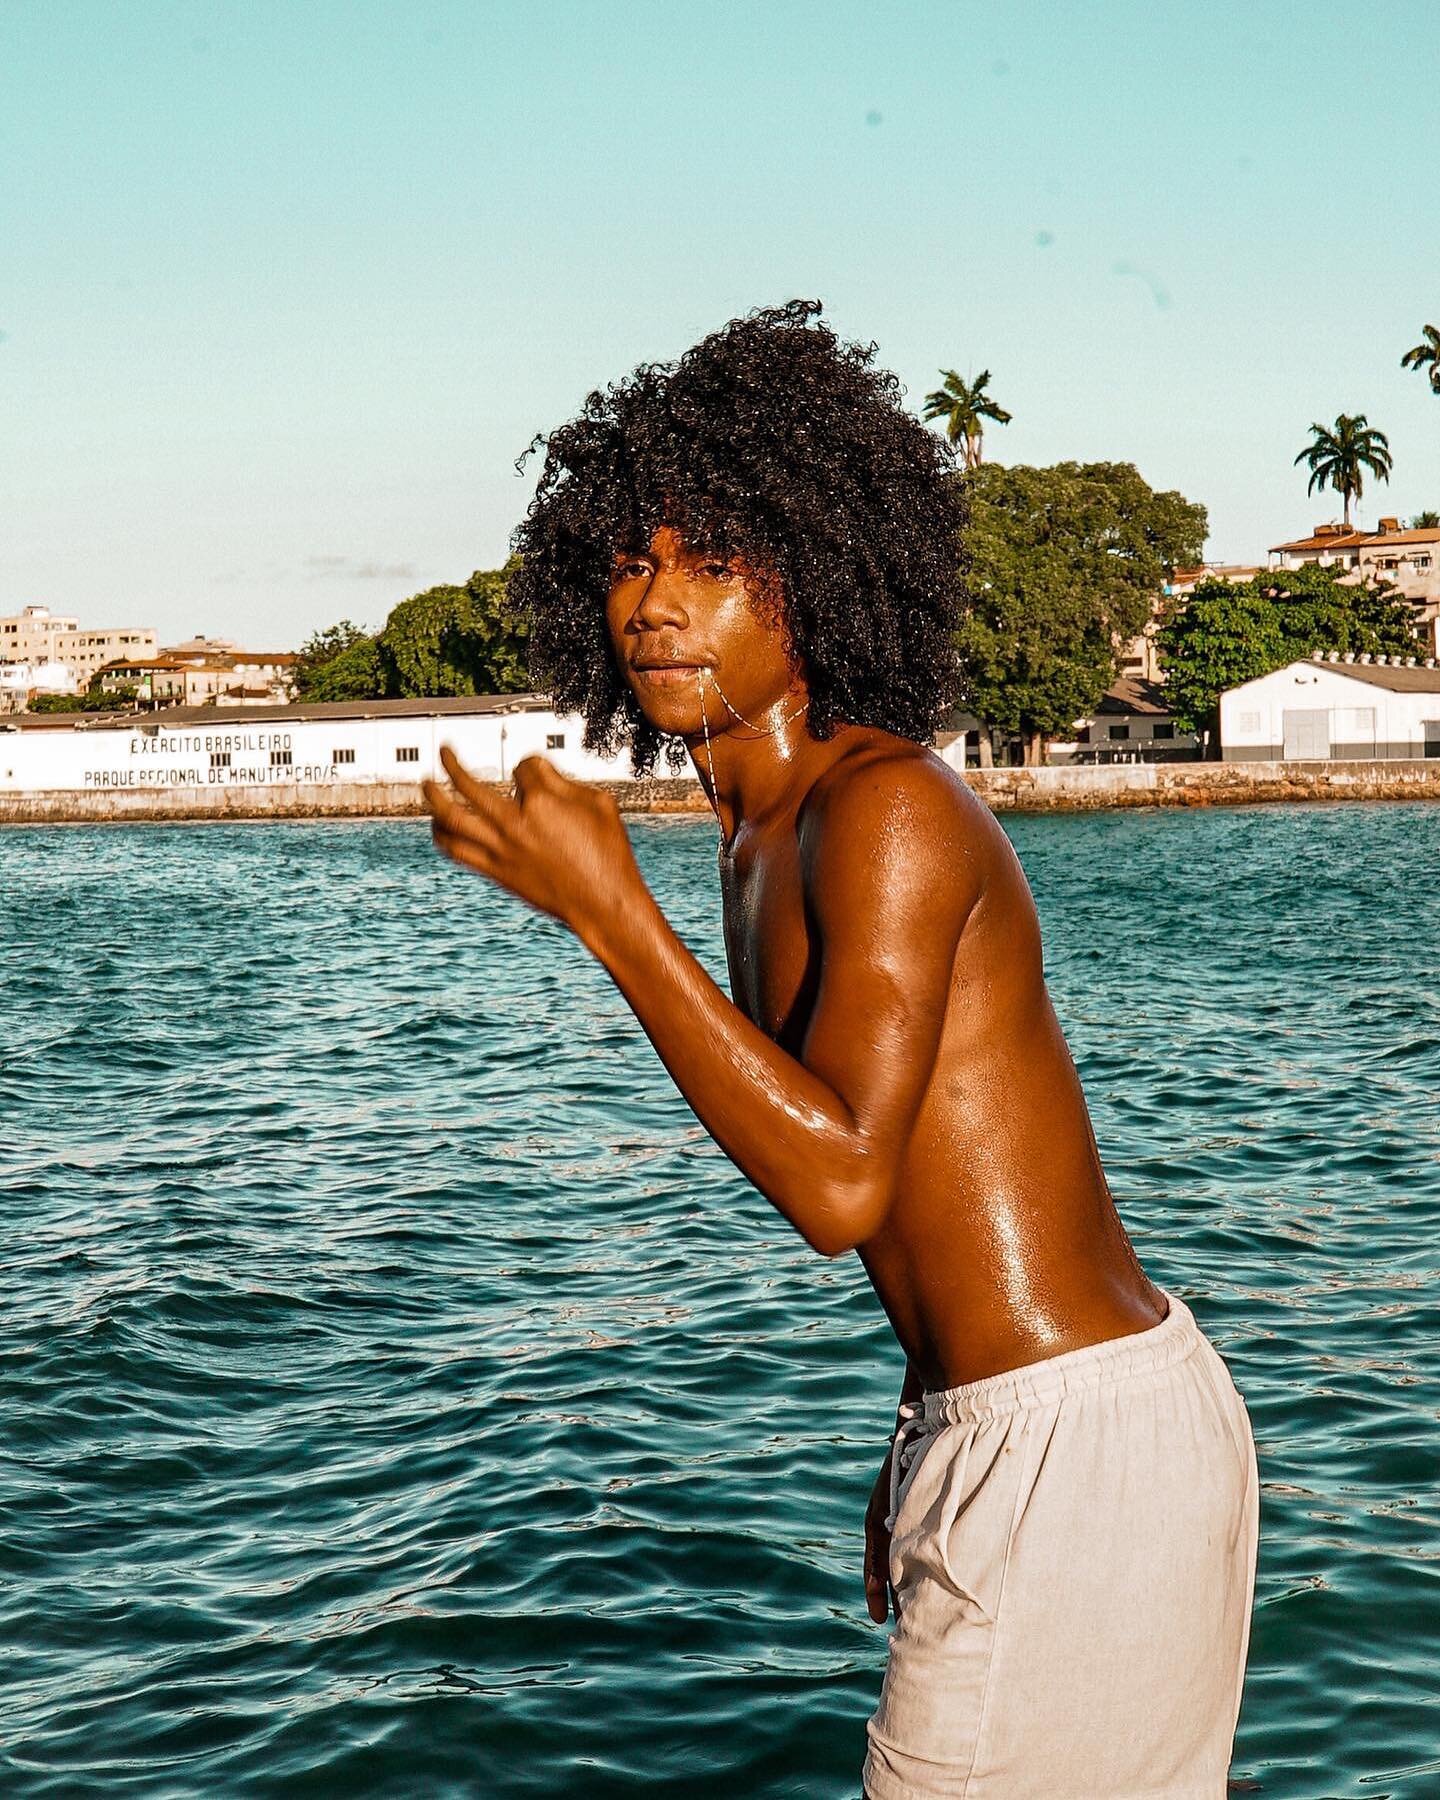 No verao em Salavador

@irlcpd took me on a journey to some places in Salvador I&rsquo;ve never experienced. Along the way I made some new friends and became the unofficial photographer/videographer for these young men as they jumped and flipped off 